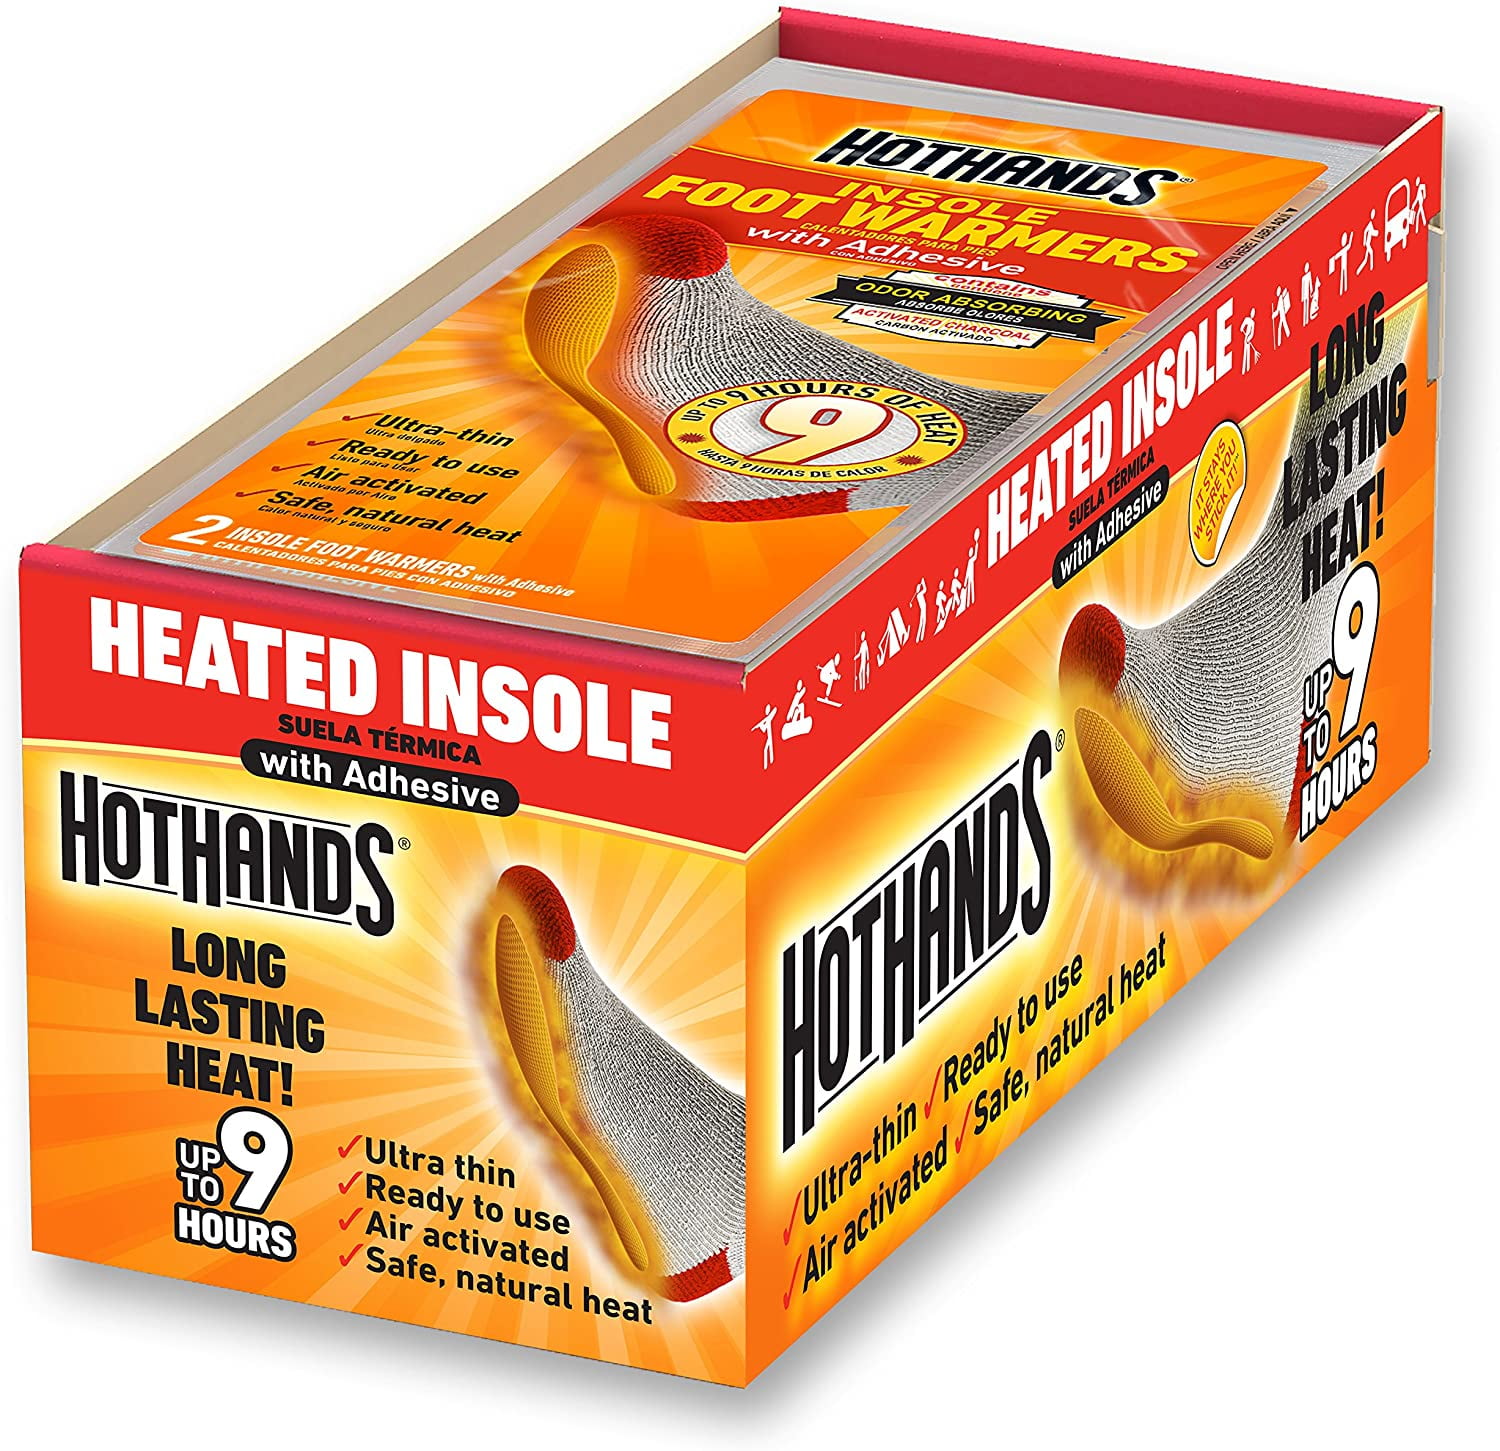 9 Hours of Heat 5 Pairs / Packs NEW HotHands Insole Foot Warmers w Adhesive 